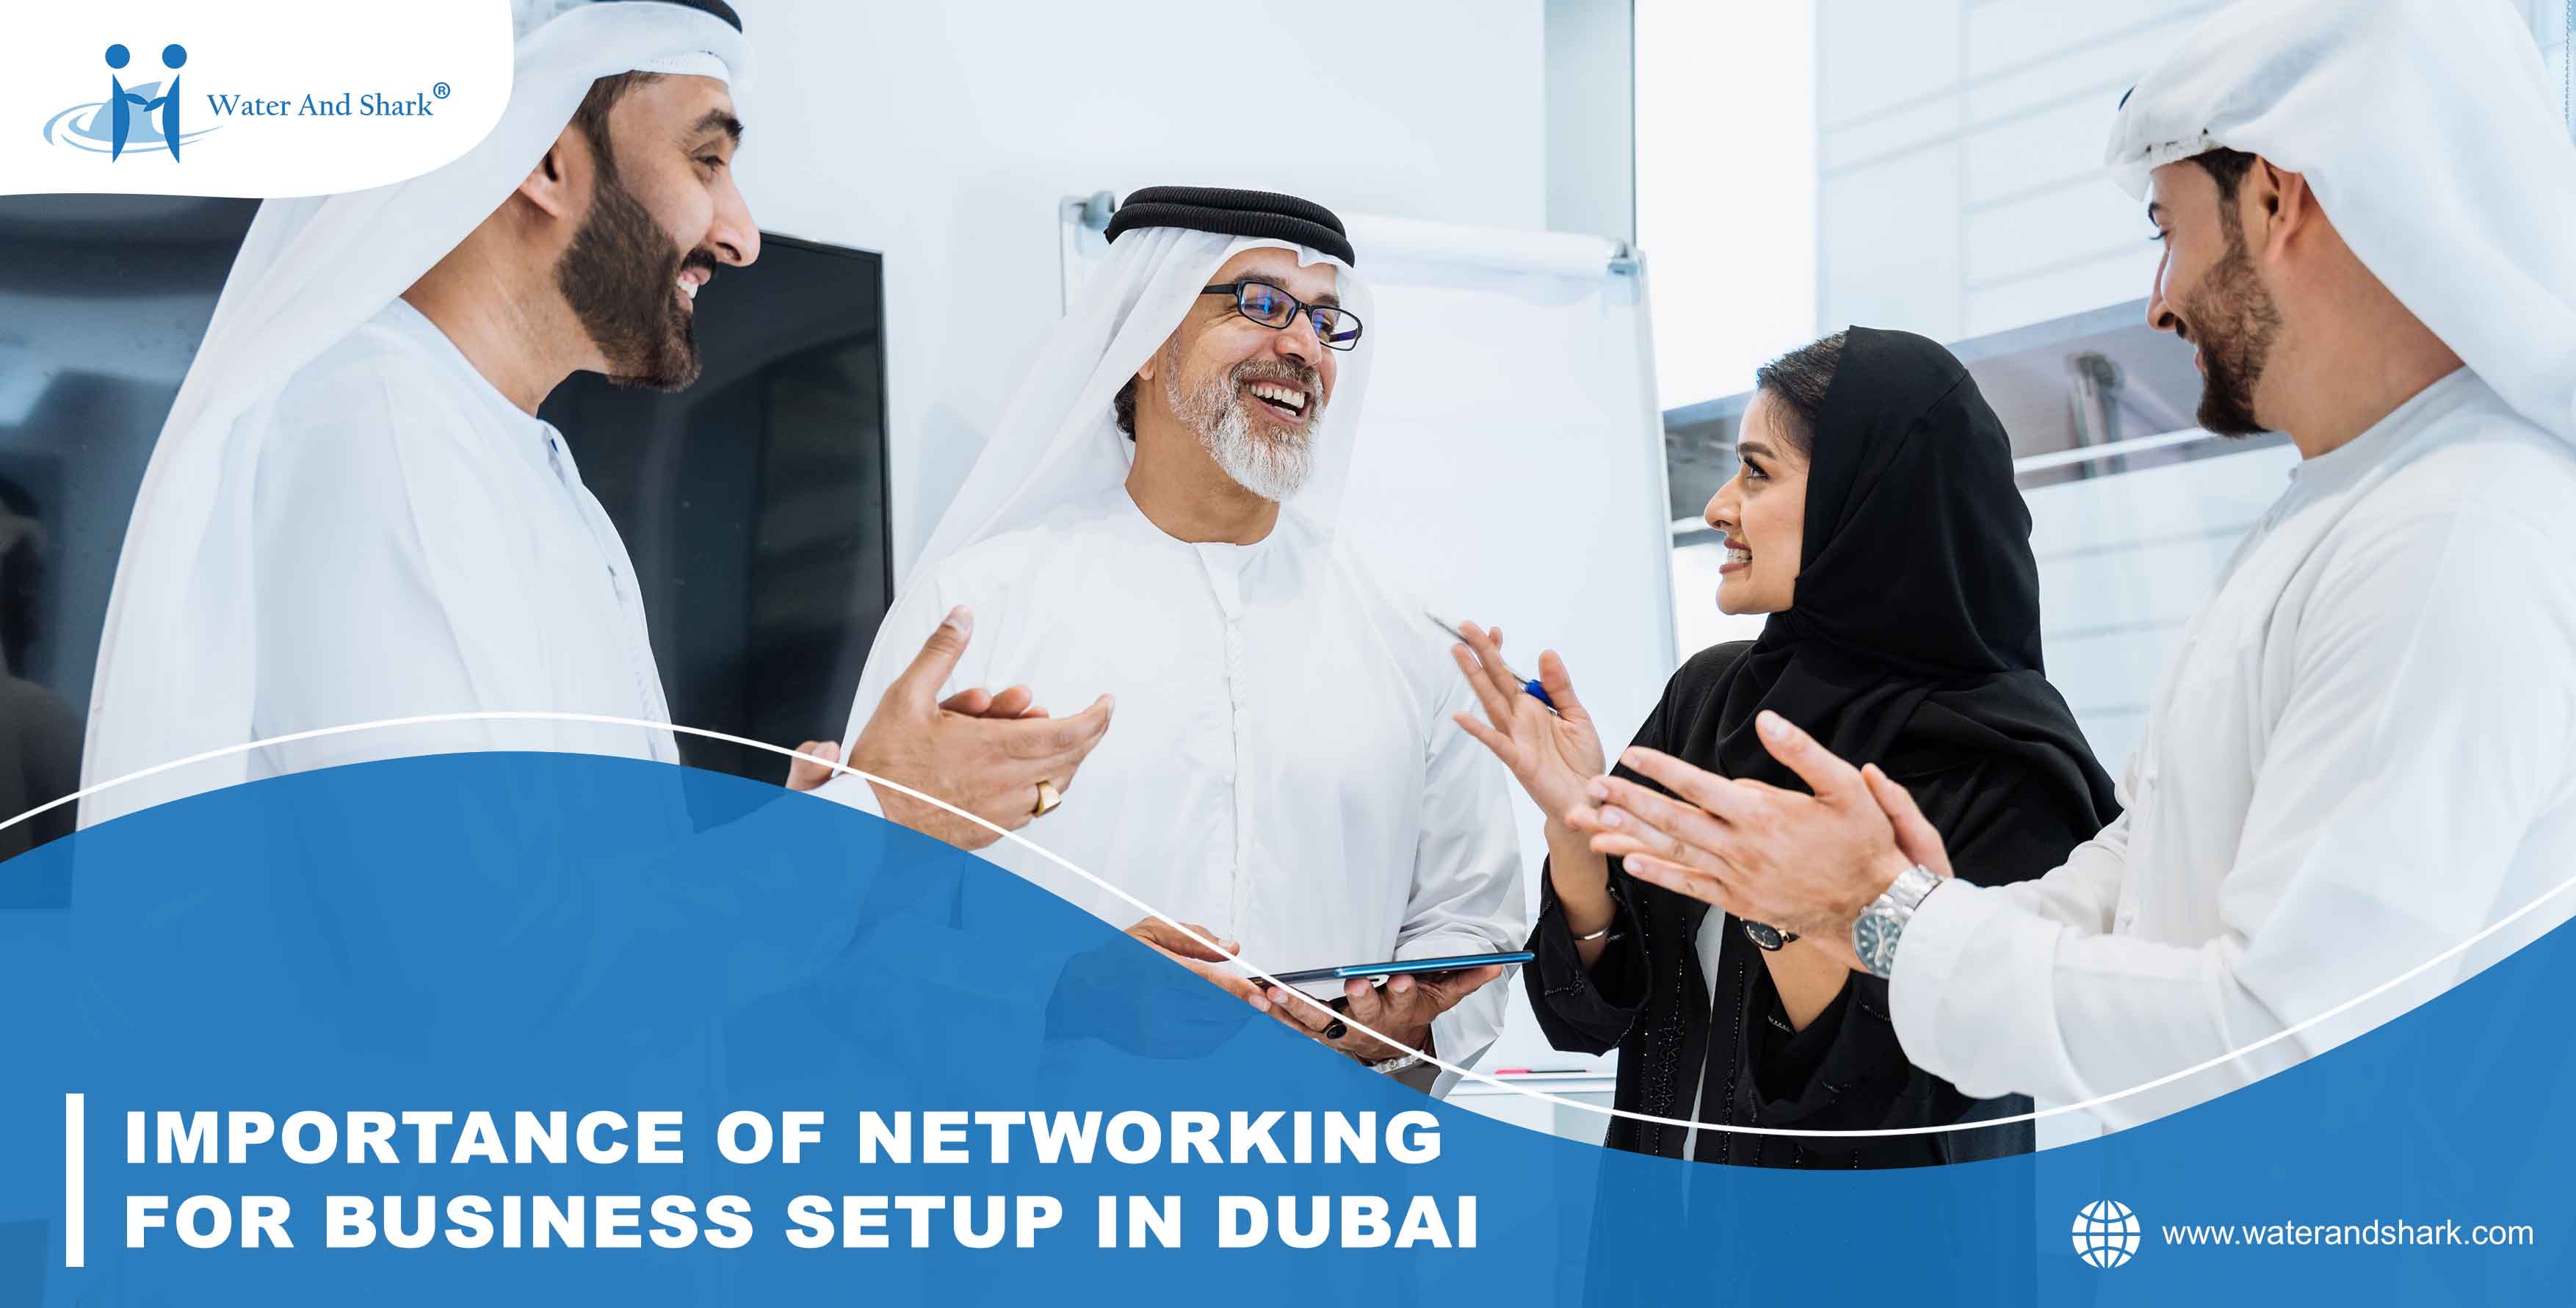 650x1280_IMPORTANCE_OF_NETWORKING_FOR_BUSINESS_SETUP_IN_DUBAI_low_size_(1).jpg